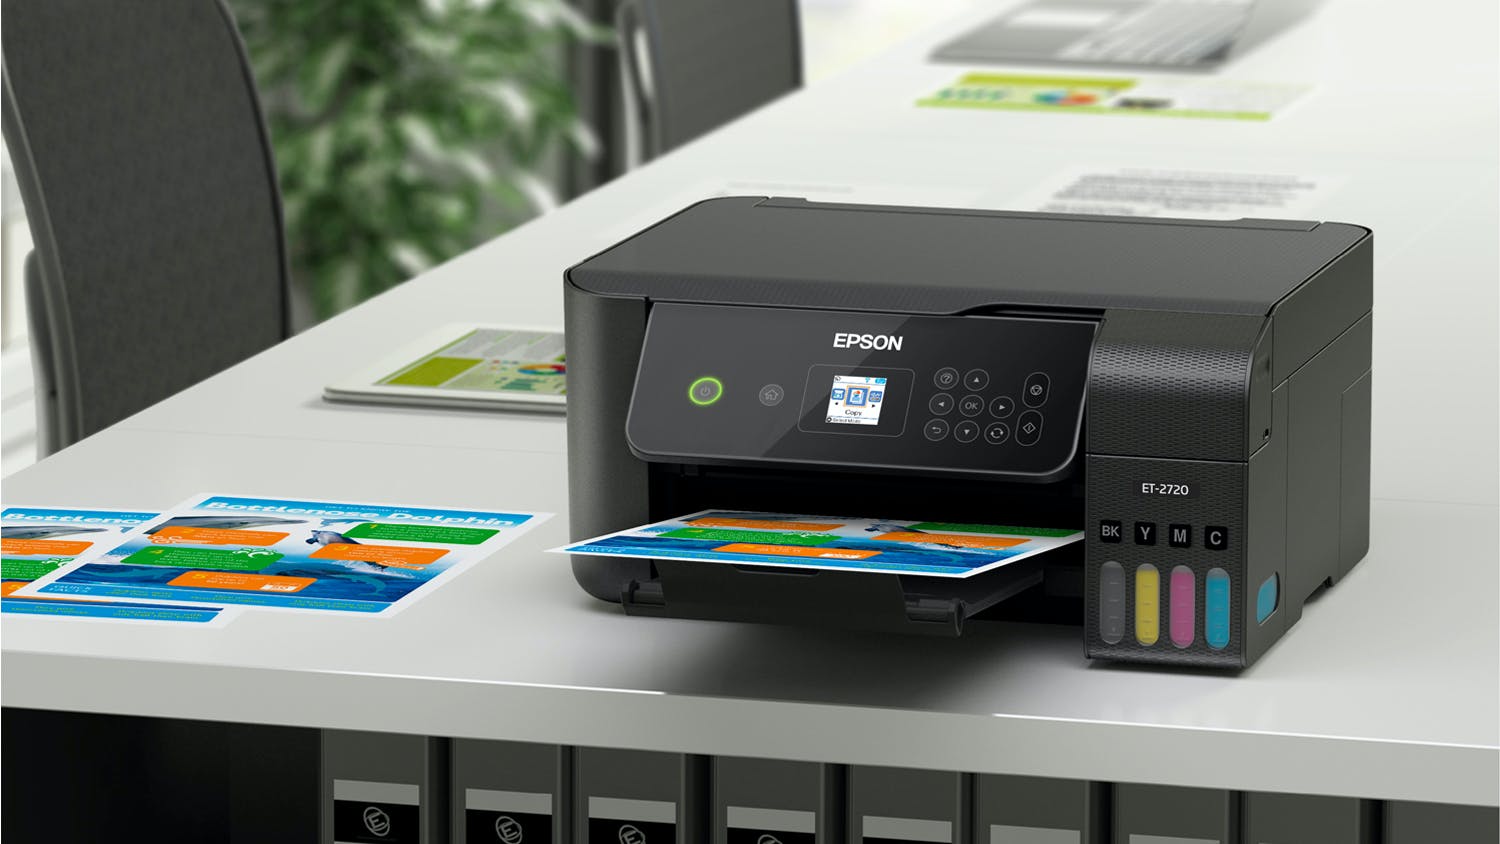 Best Printer on Amazon - Top Ranked and Reviewed